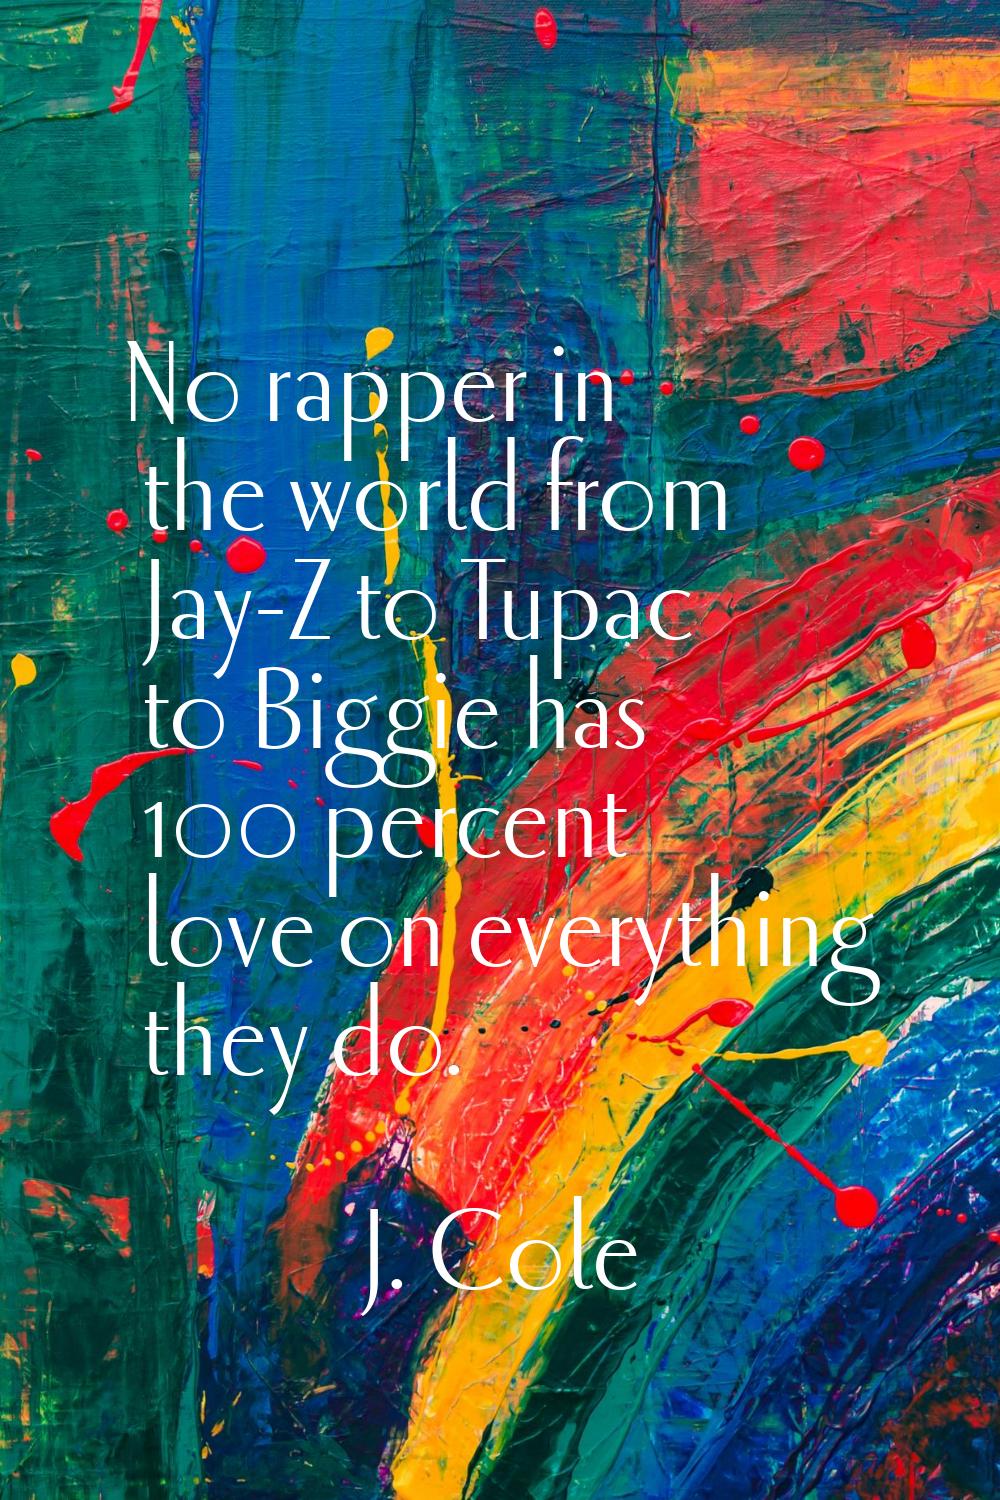 No rapper in the world from Jay-Z to Tupac to Biggie has 100 percent love on everything they do.